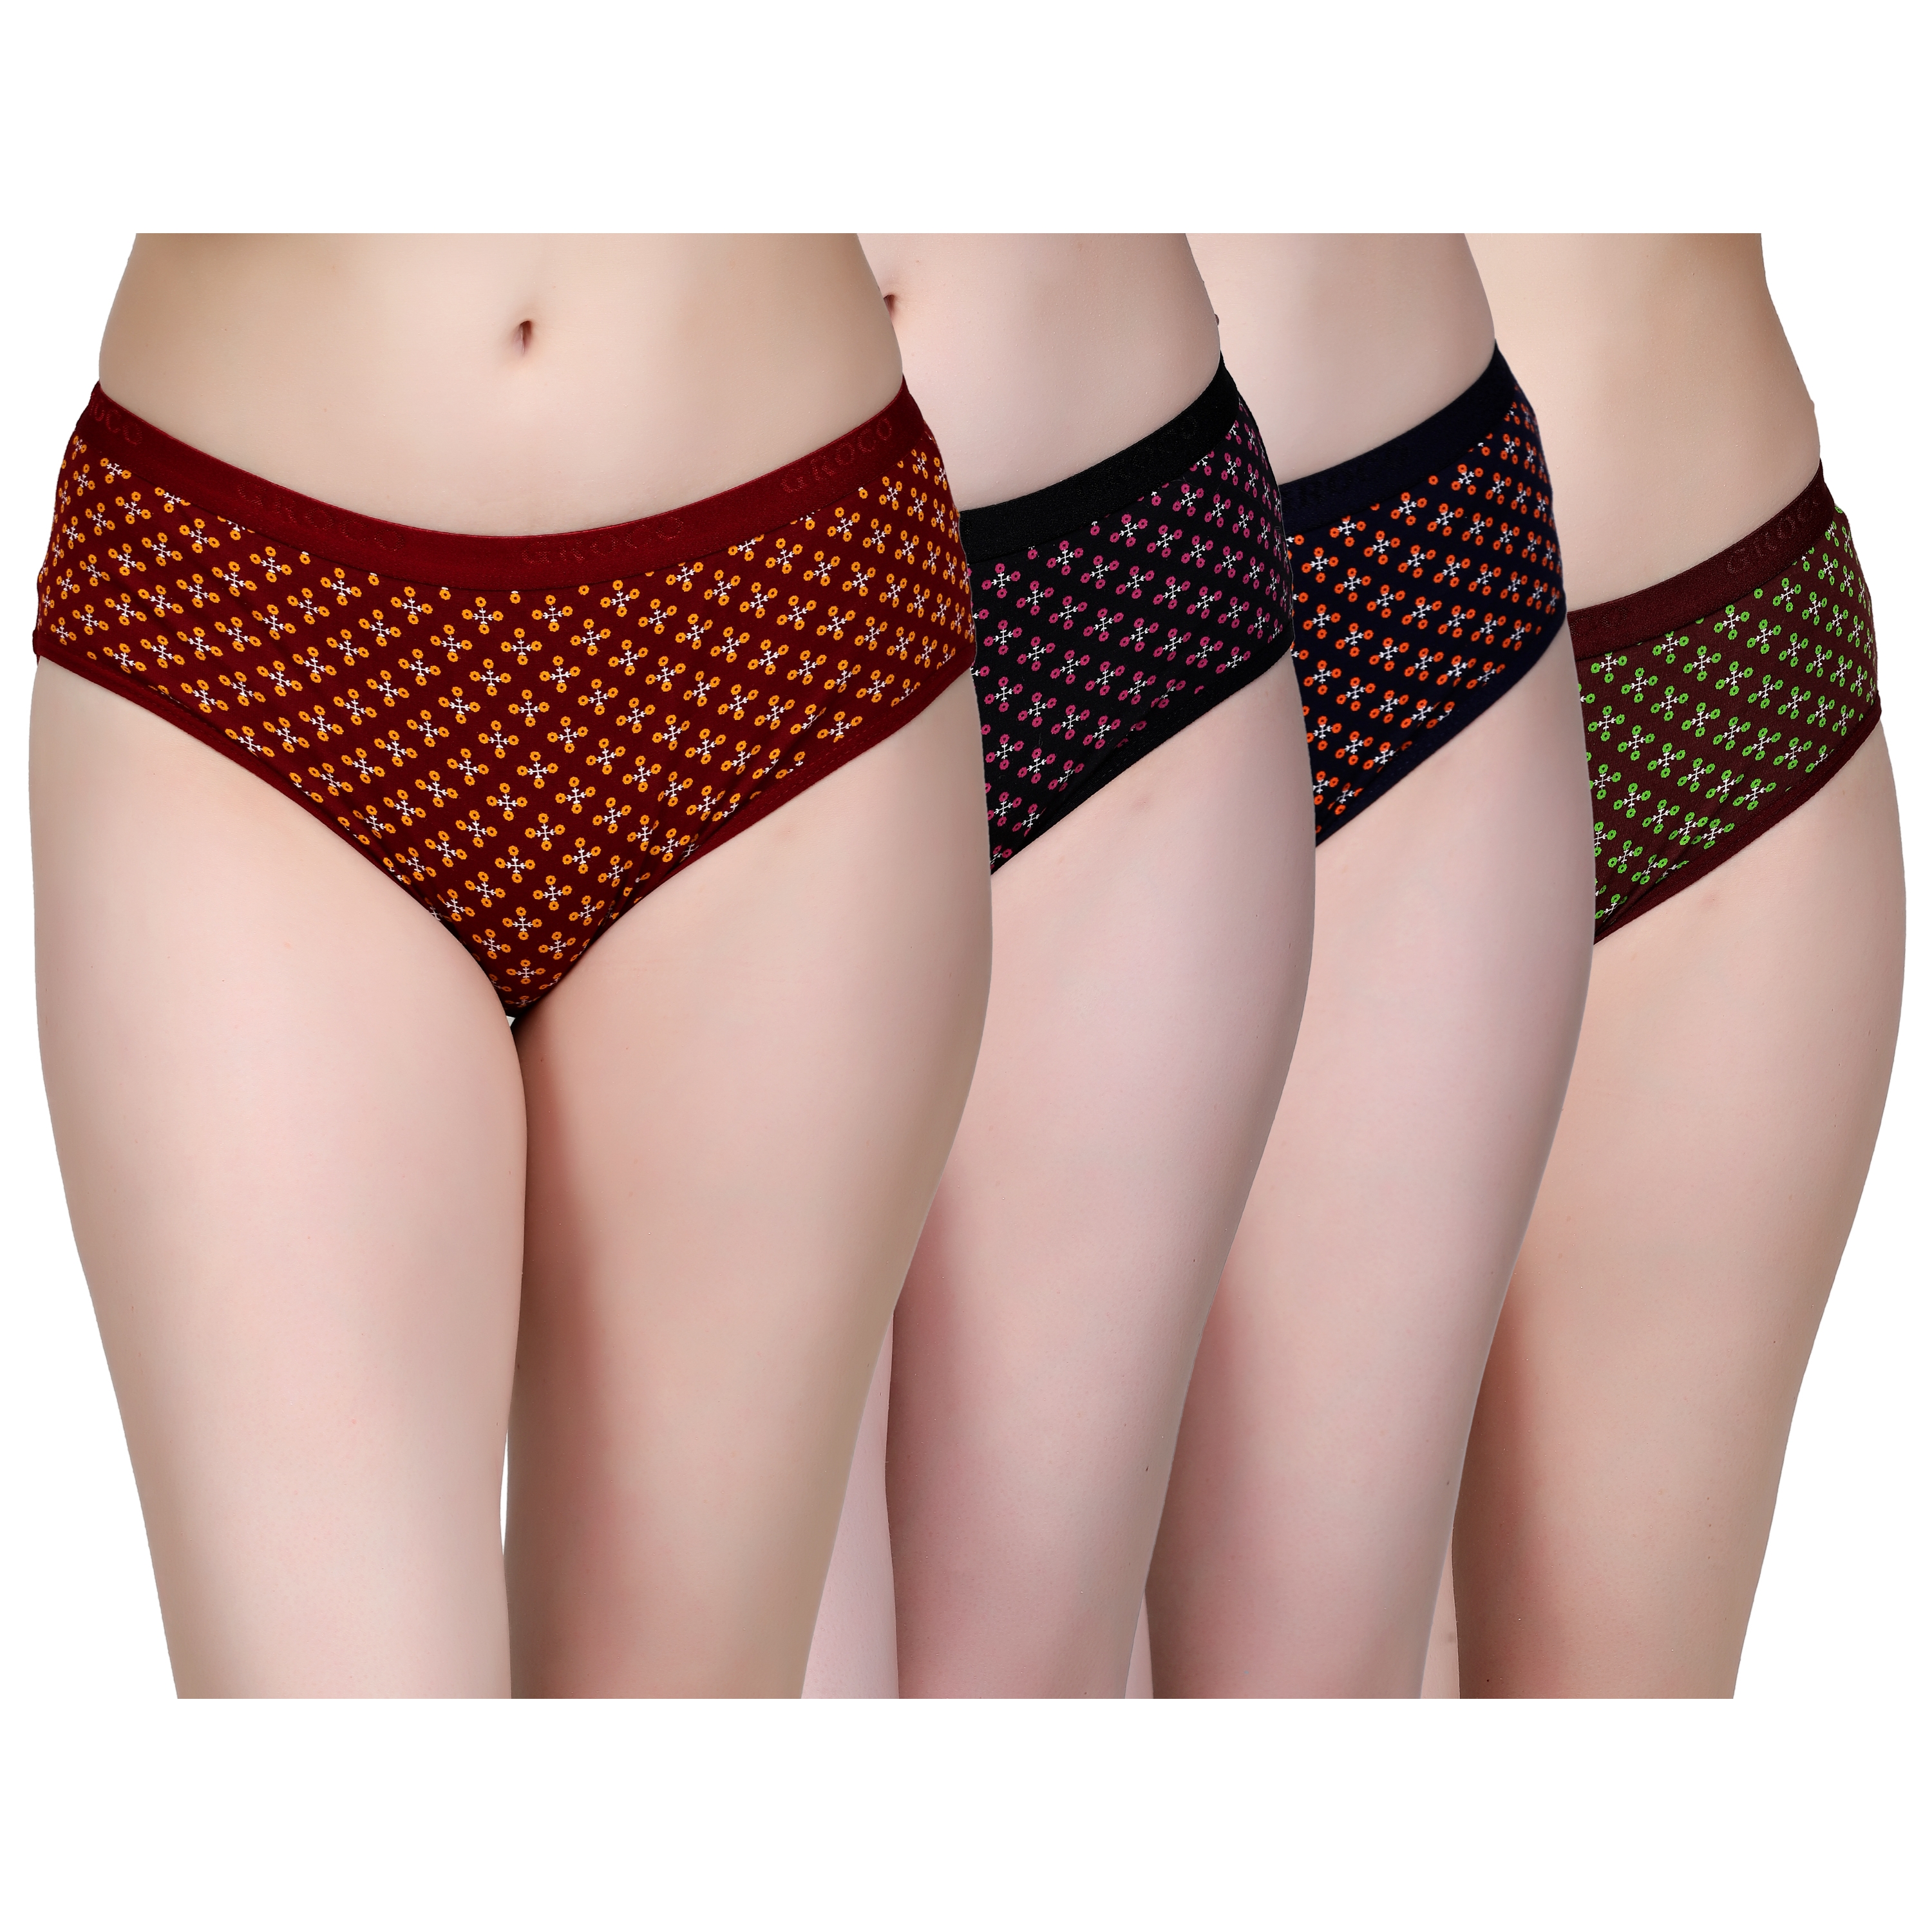 PEACH SMILE | PEACH SMILE Hipster Panties for Women